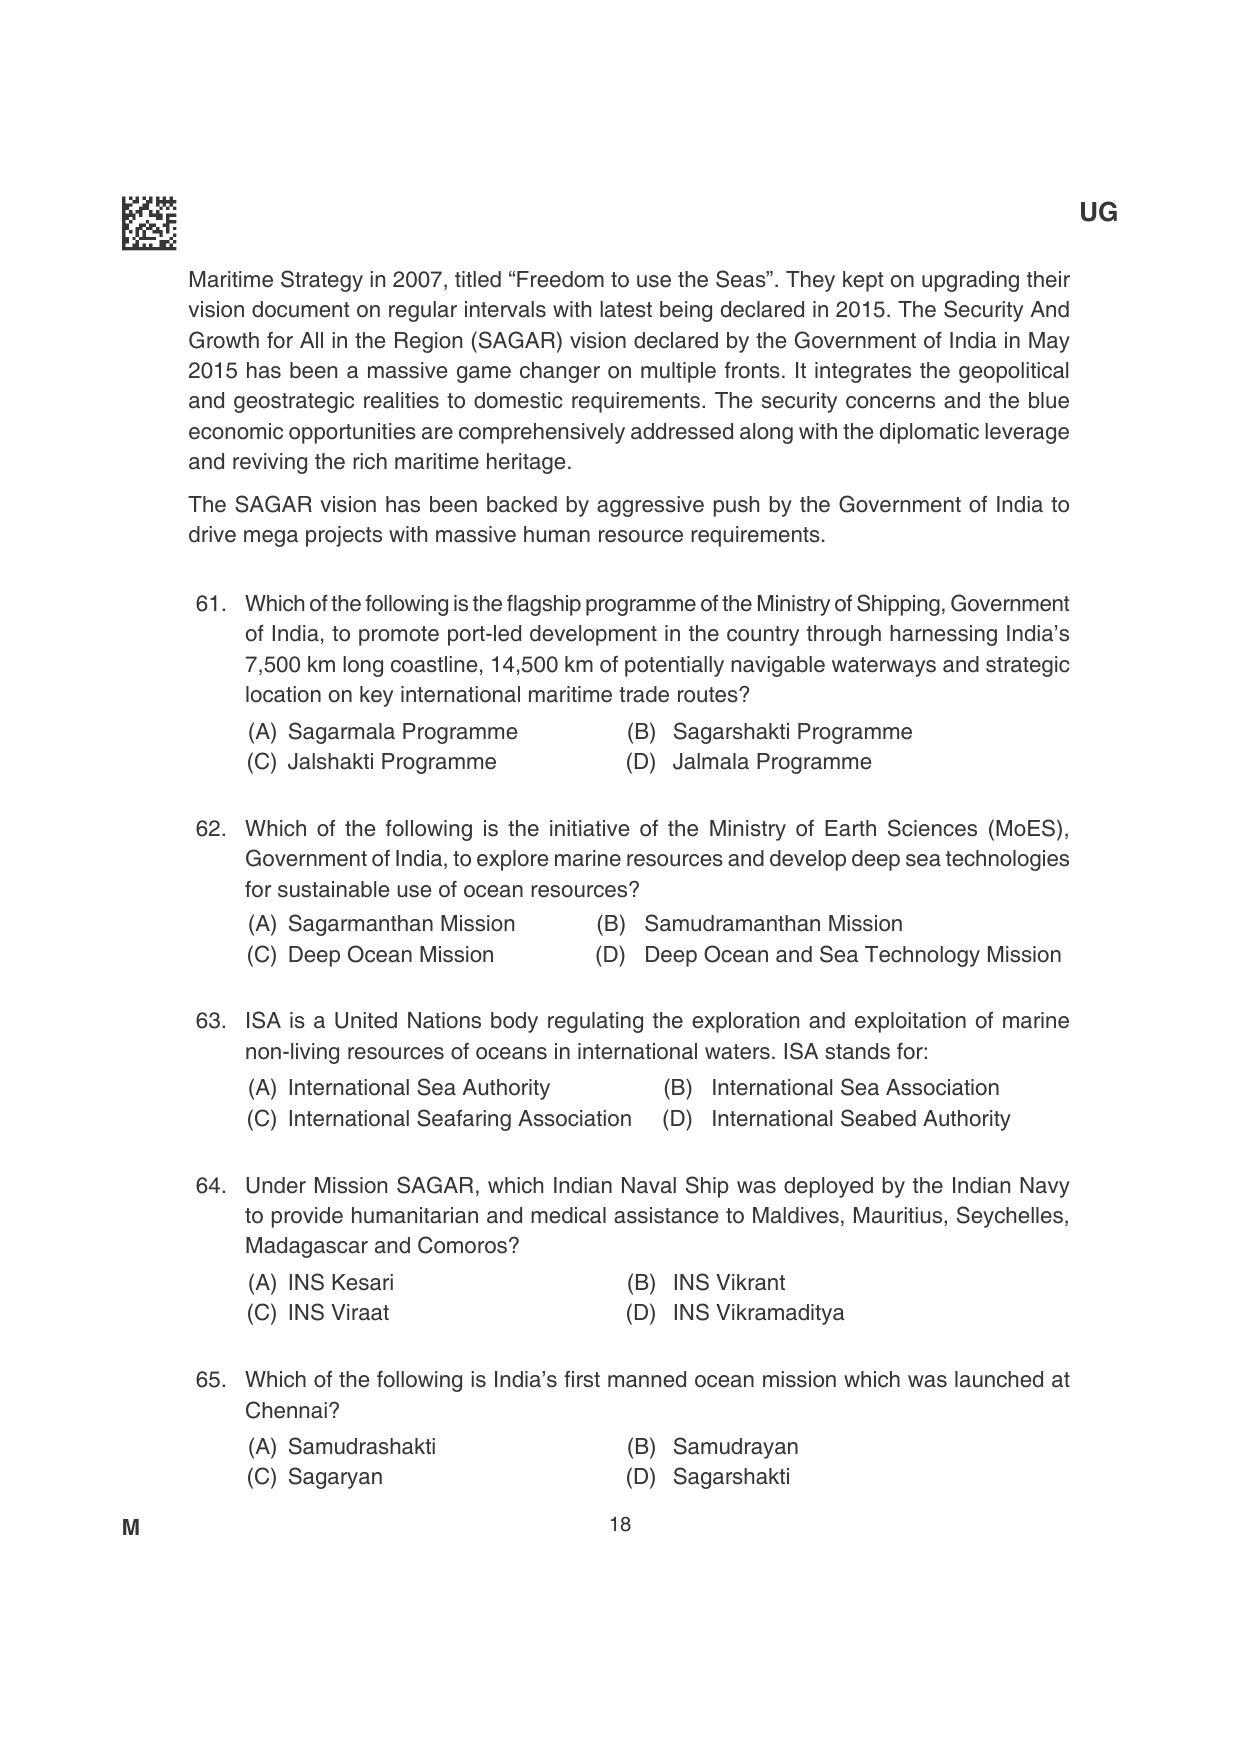 CLAT 2022 UG Question Papers - Page 18